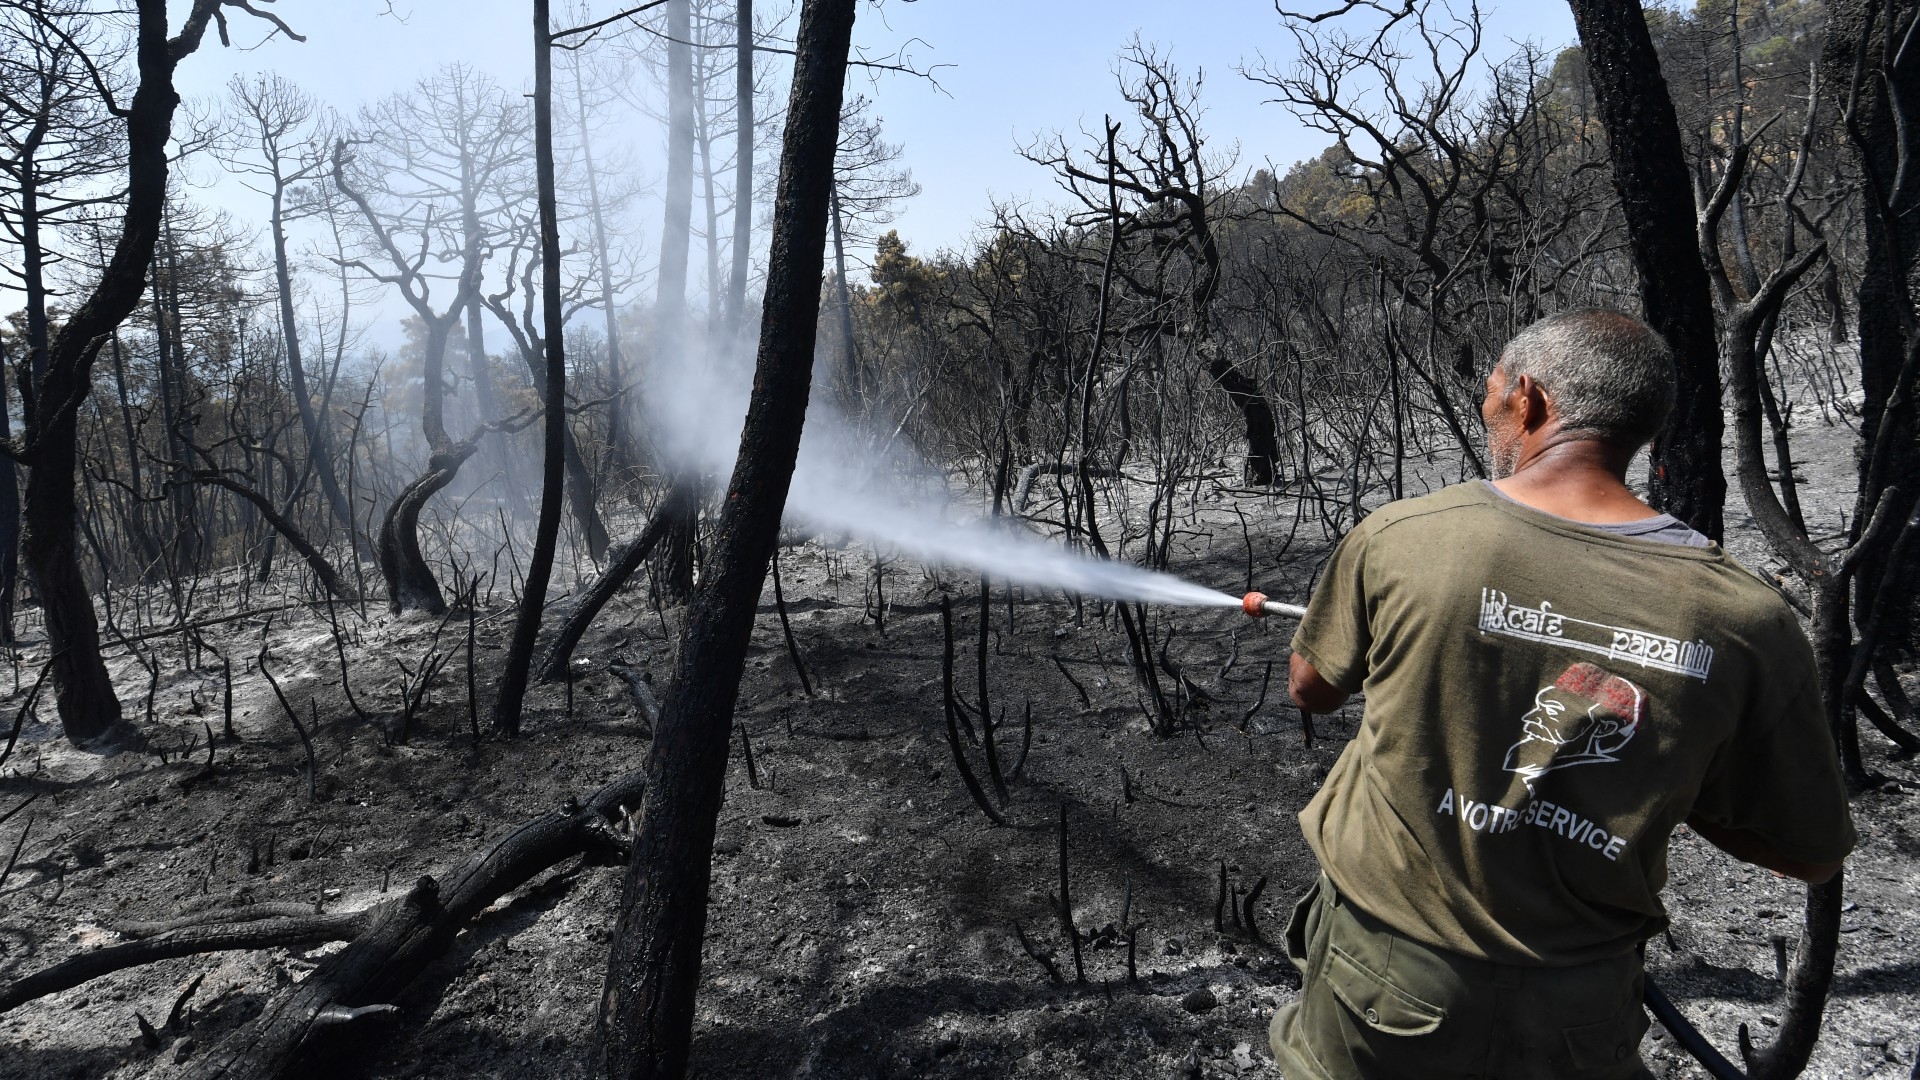 A man sprays water on burned trees to cool them down following a fire, in a forest in Melloula near Tabarka at the northwestern Tunisian border with Algeria, on 20 July (AFP)